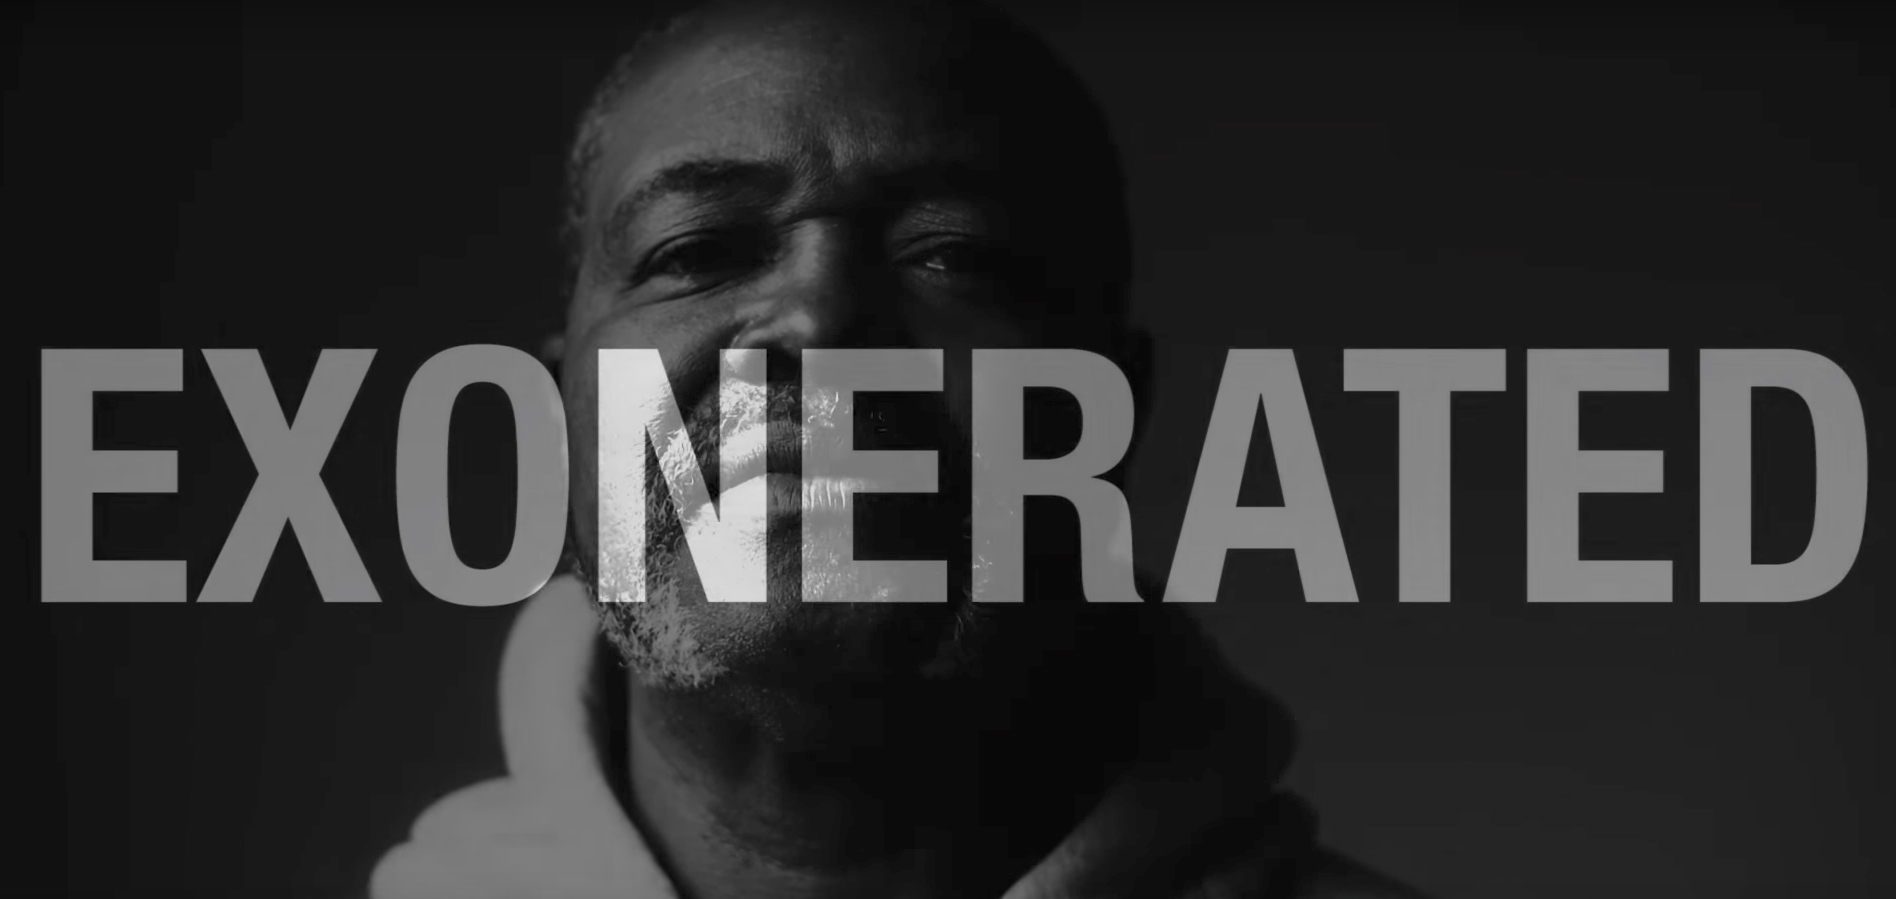 VIDEO: Exoneree Speaks About His Wrongful Conviction and Death Sentence